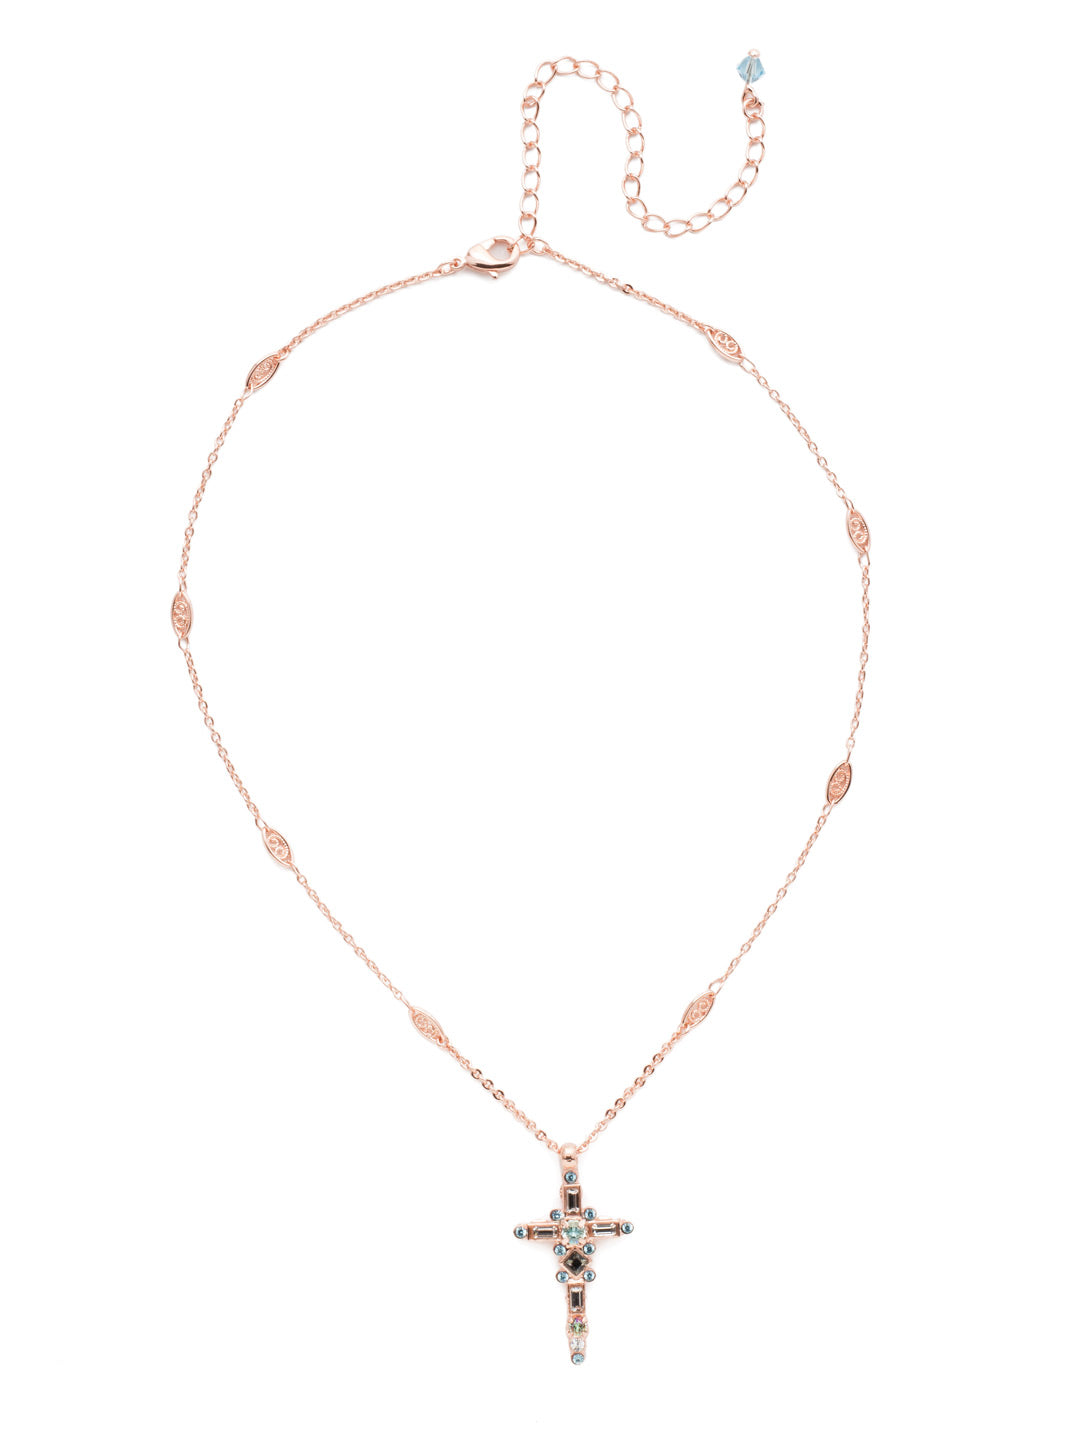 Dierdre Cross Pendant Necklace - NDQ54RGCAZ - A truly divine pendant. This delicate cross necklace features multi-cut crystals in an antique inspired setting. This crystal cross necklace offers movement on the chain for ease of wear. From Sorrelli's Crystal Azure collection in our Rose Gold-tone finish.